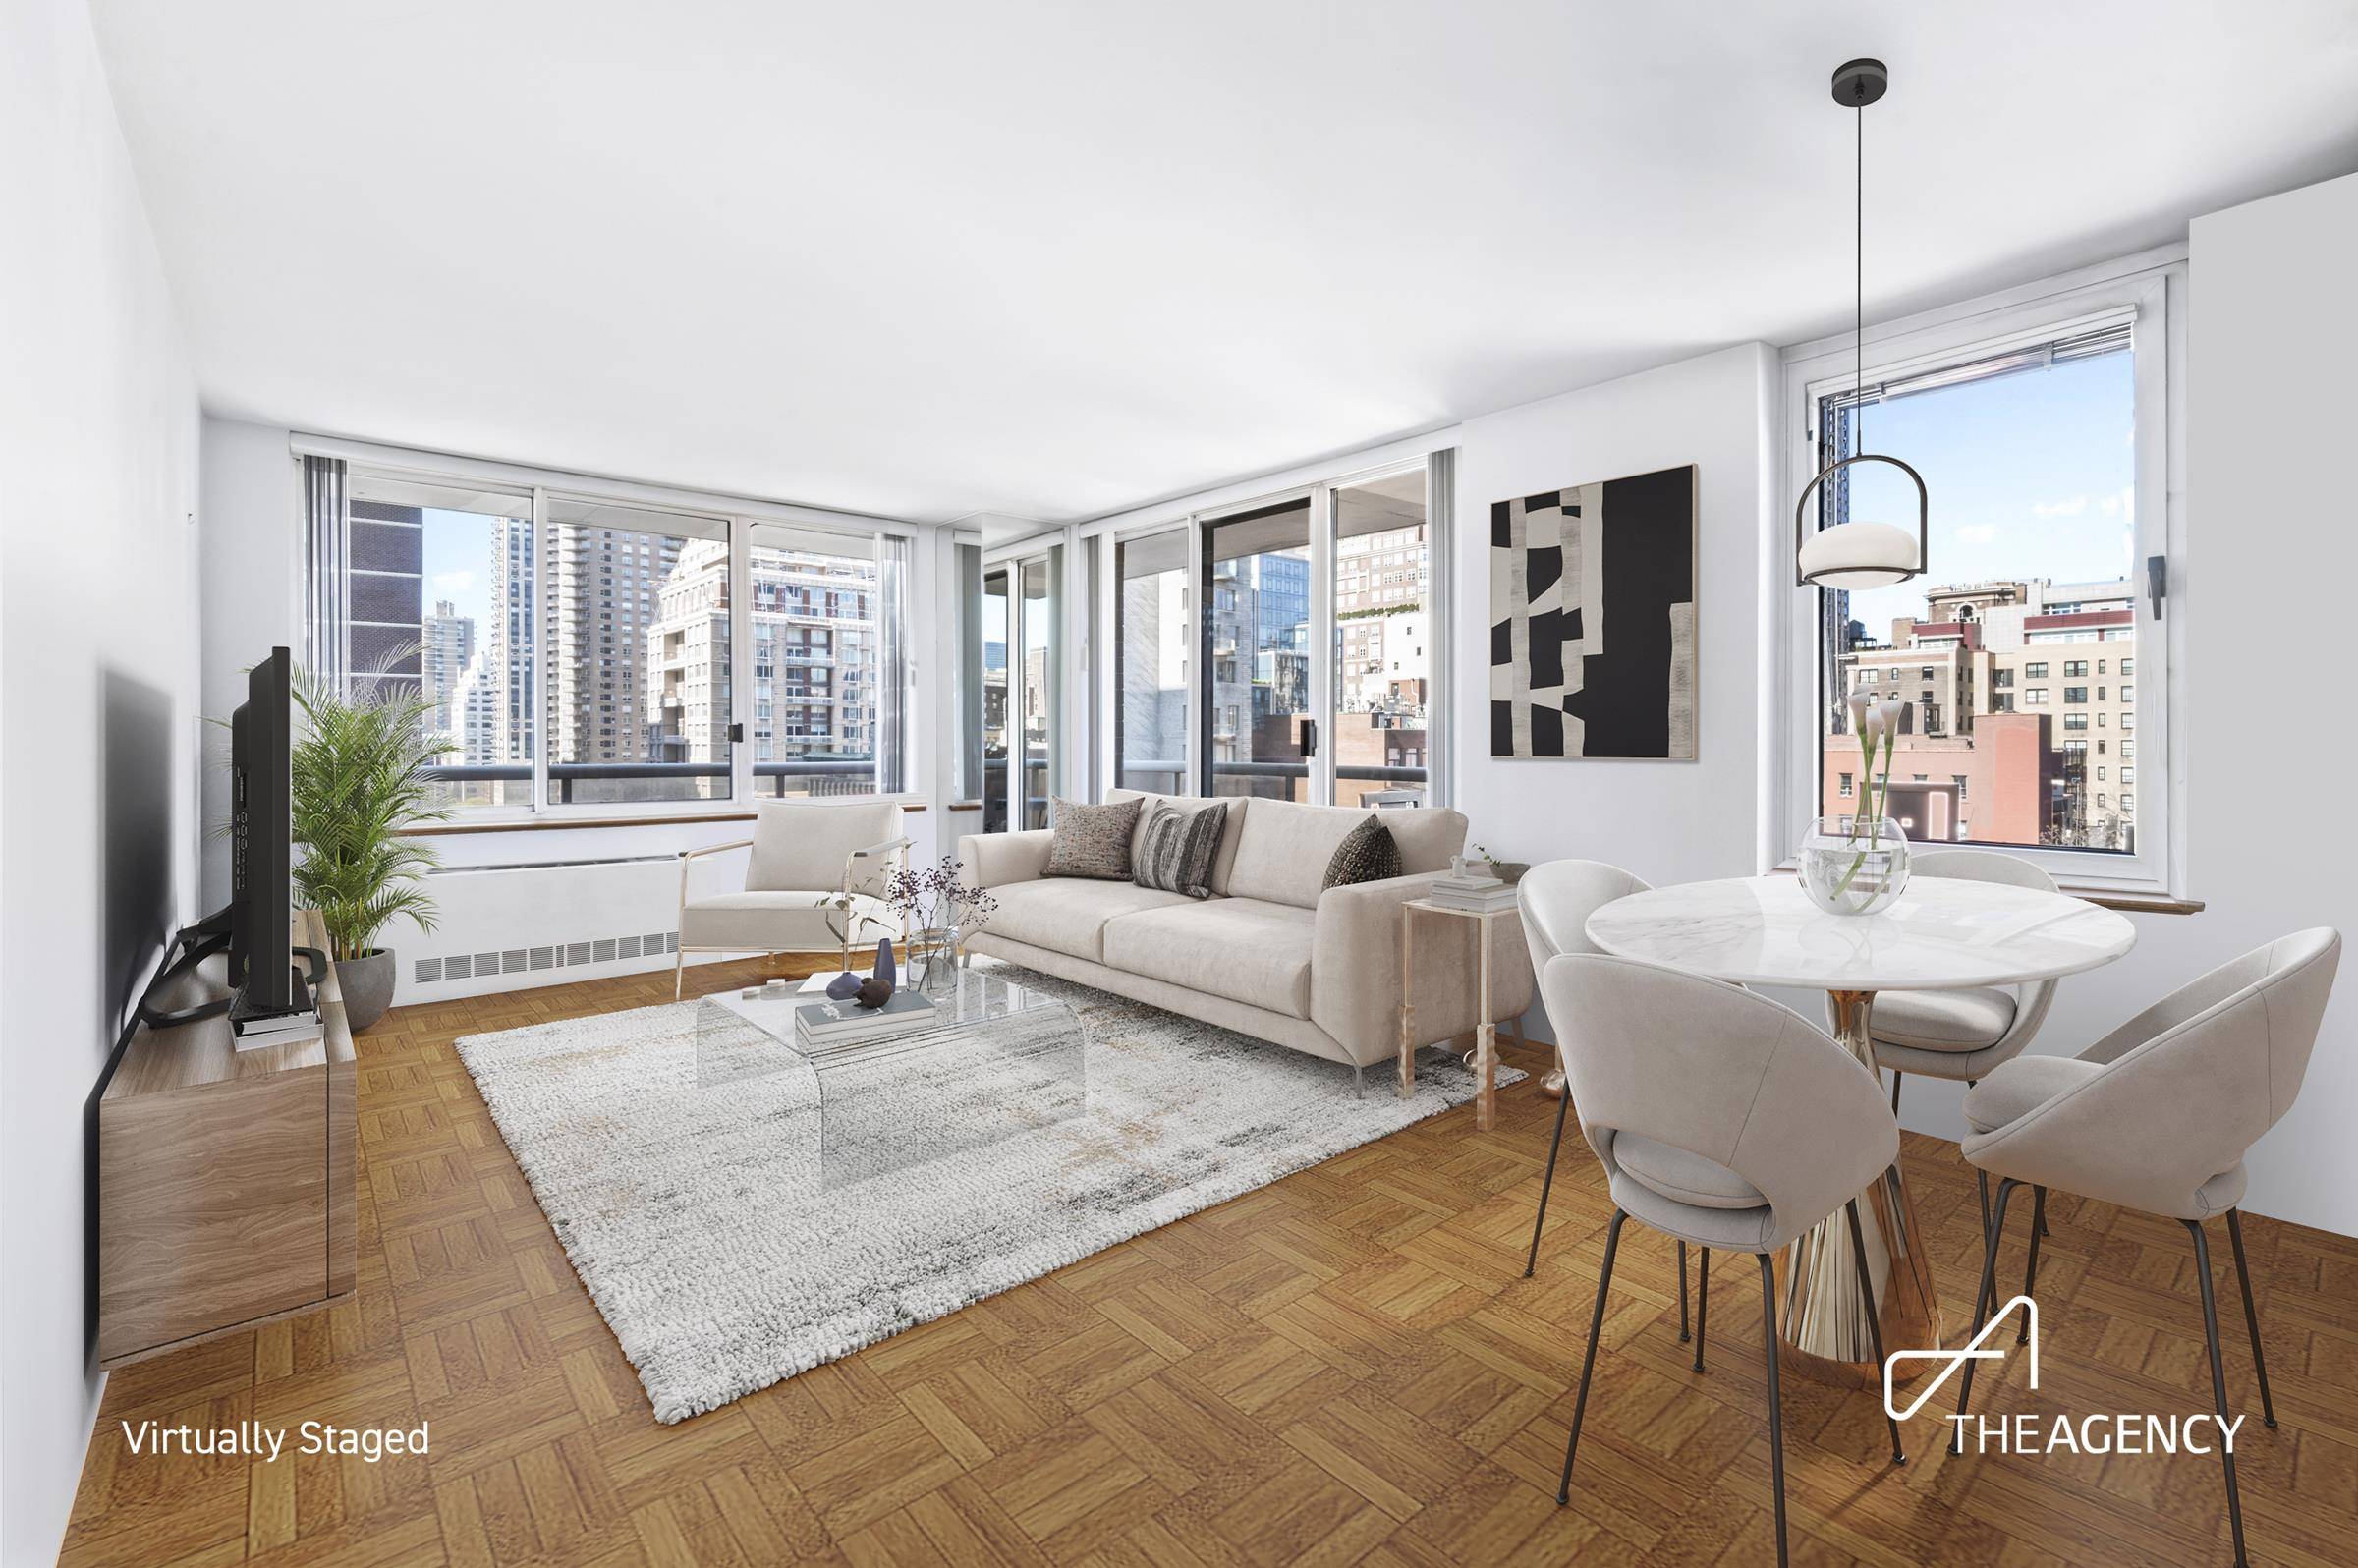 Welcome home to this spacious, move in ready one bedroom condo located in the heart of the Upper East Side !